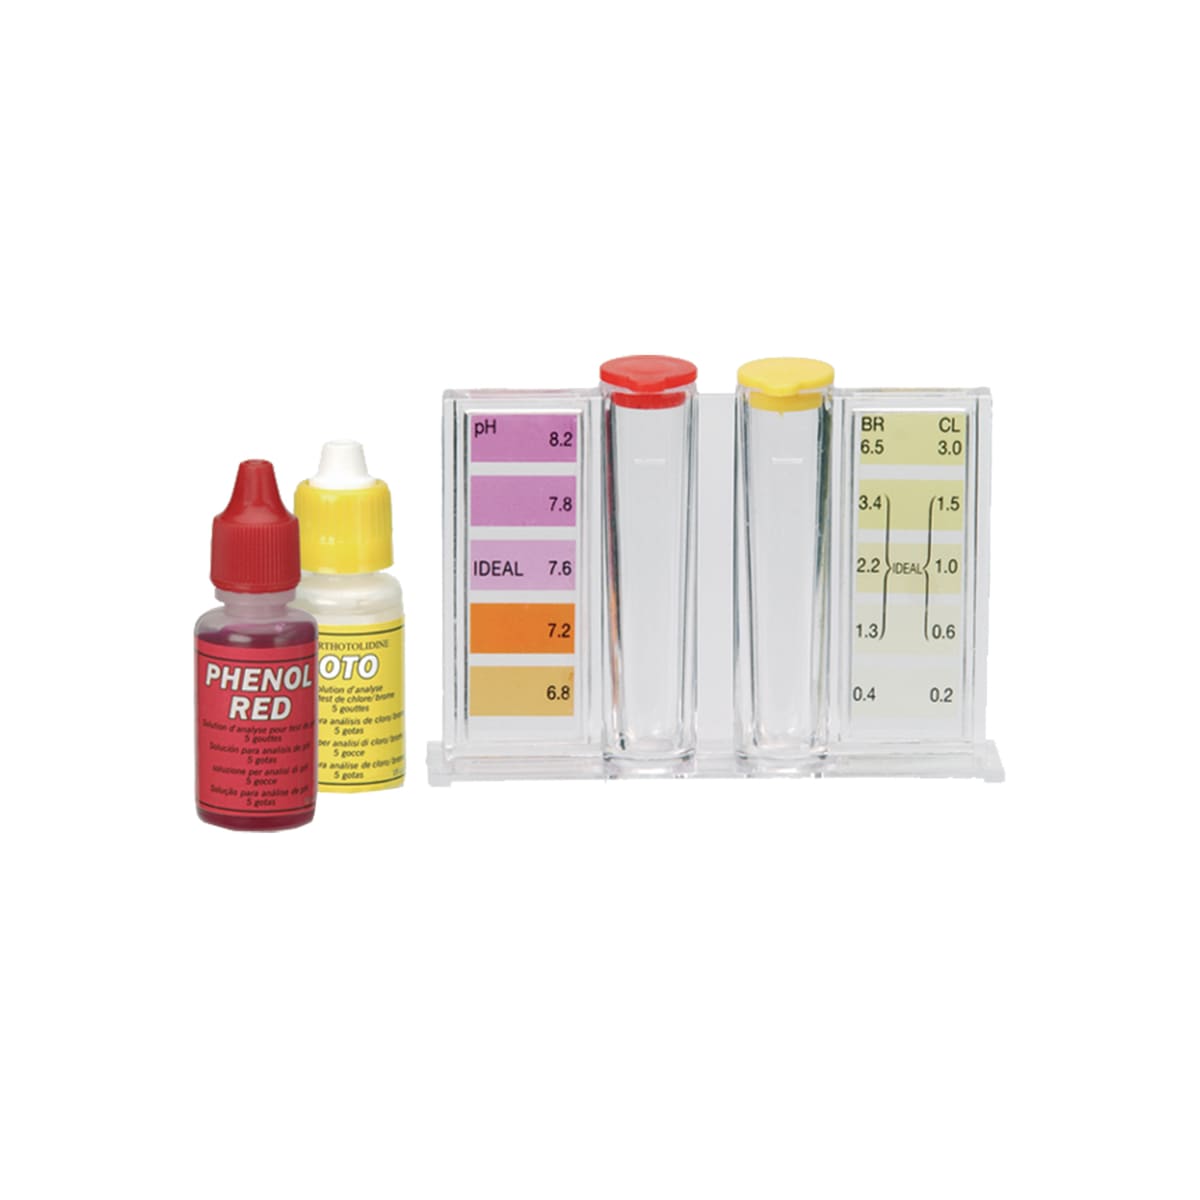 CHLORINATION AND PH TEST KIT FOR SWIMMING POOLS